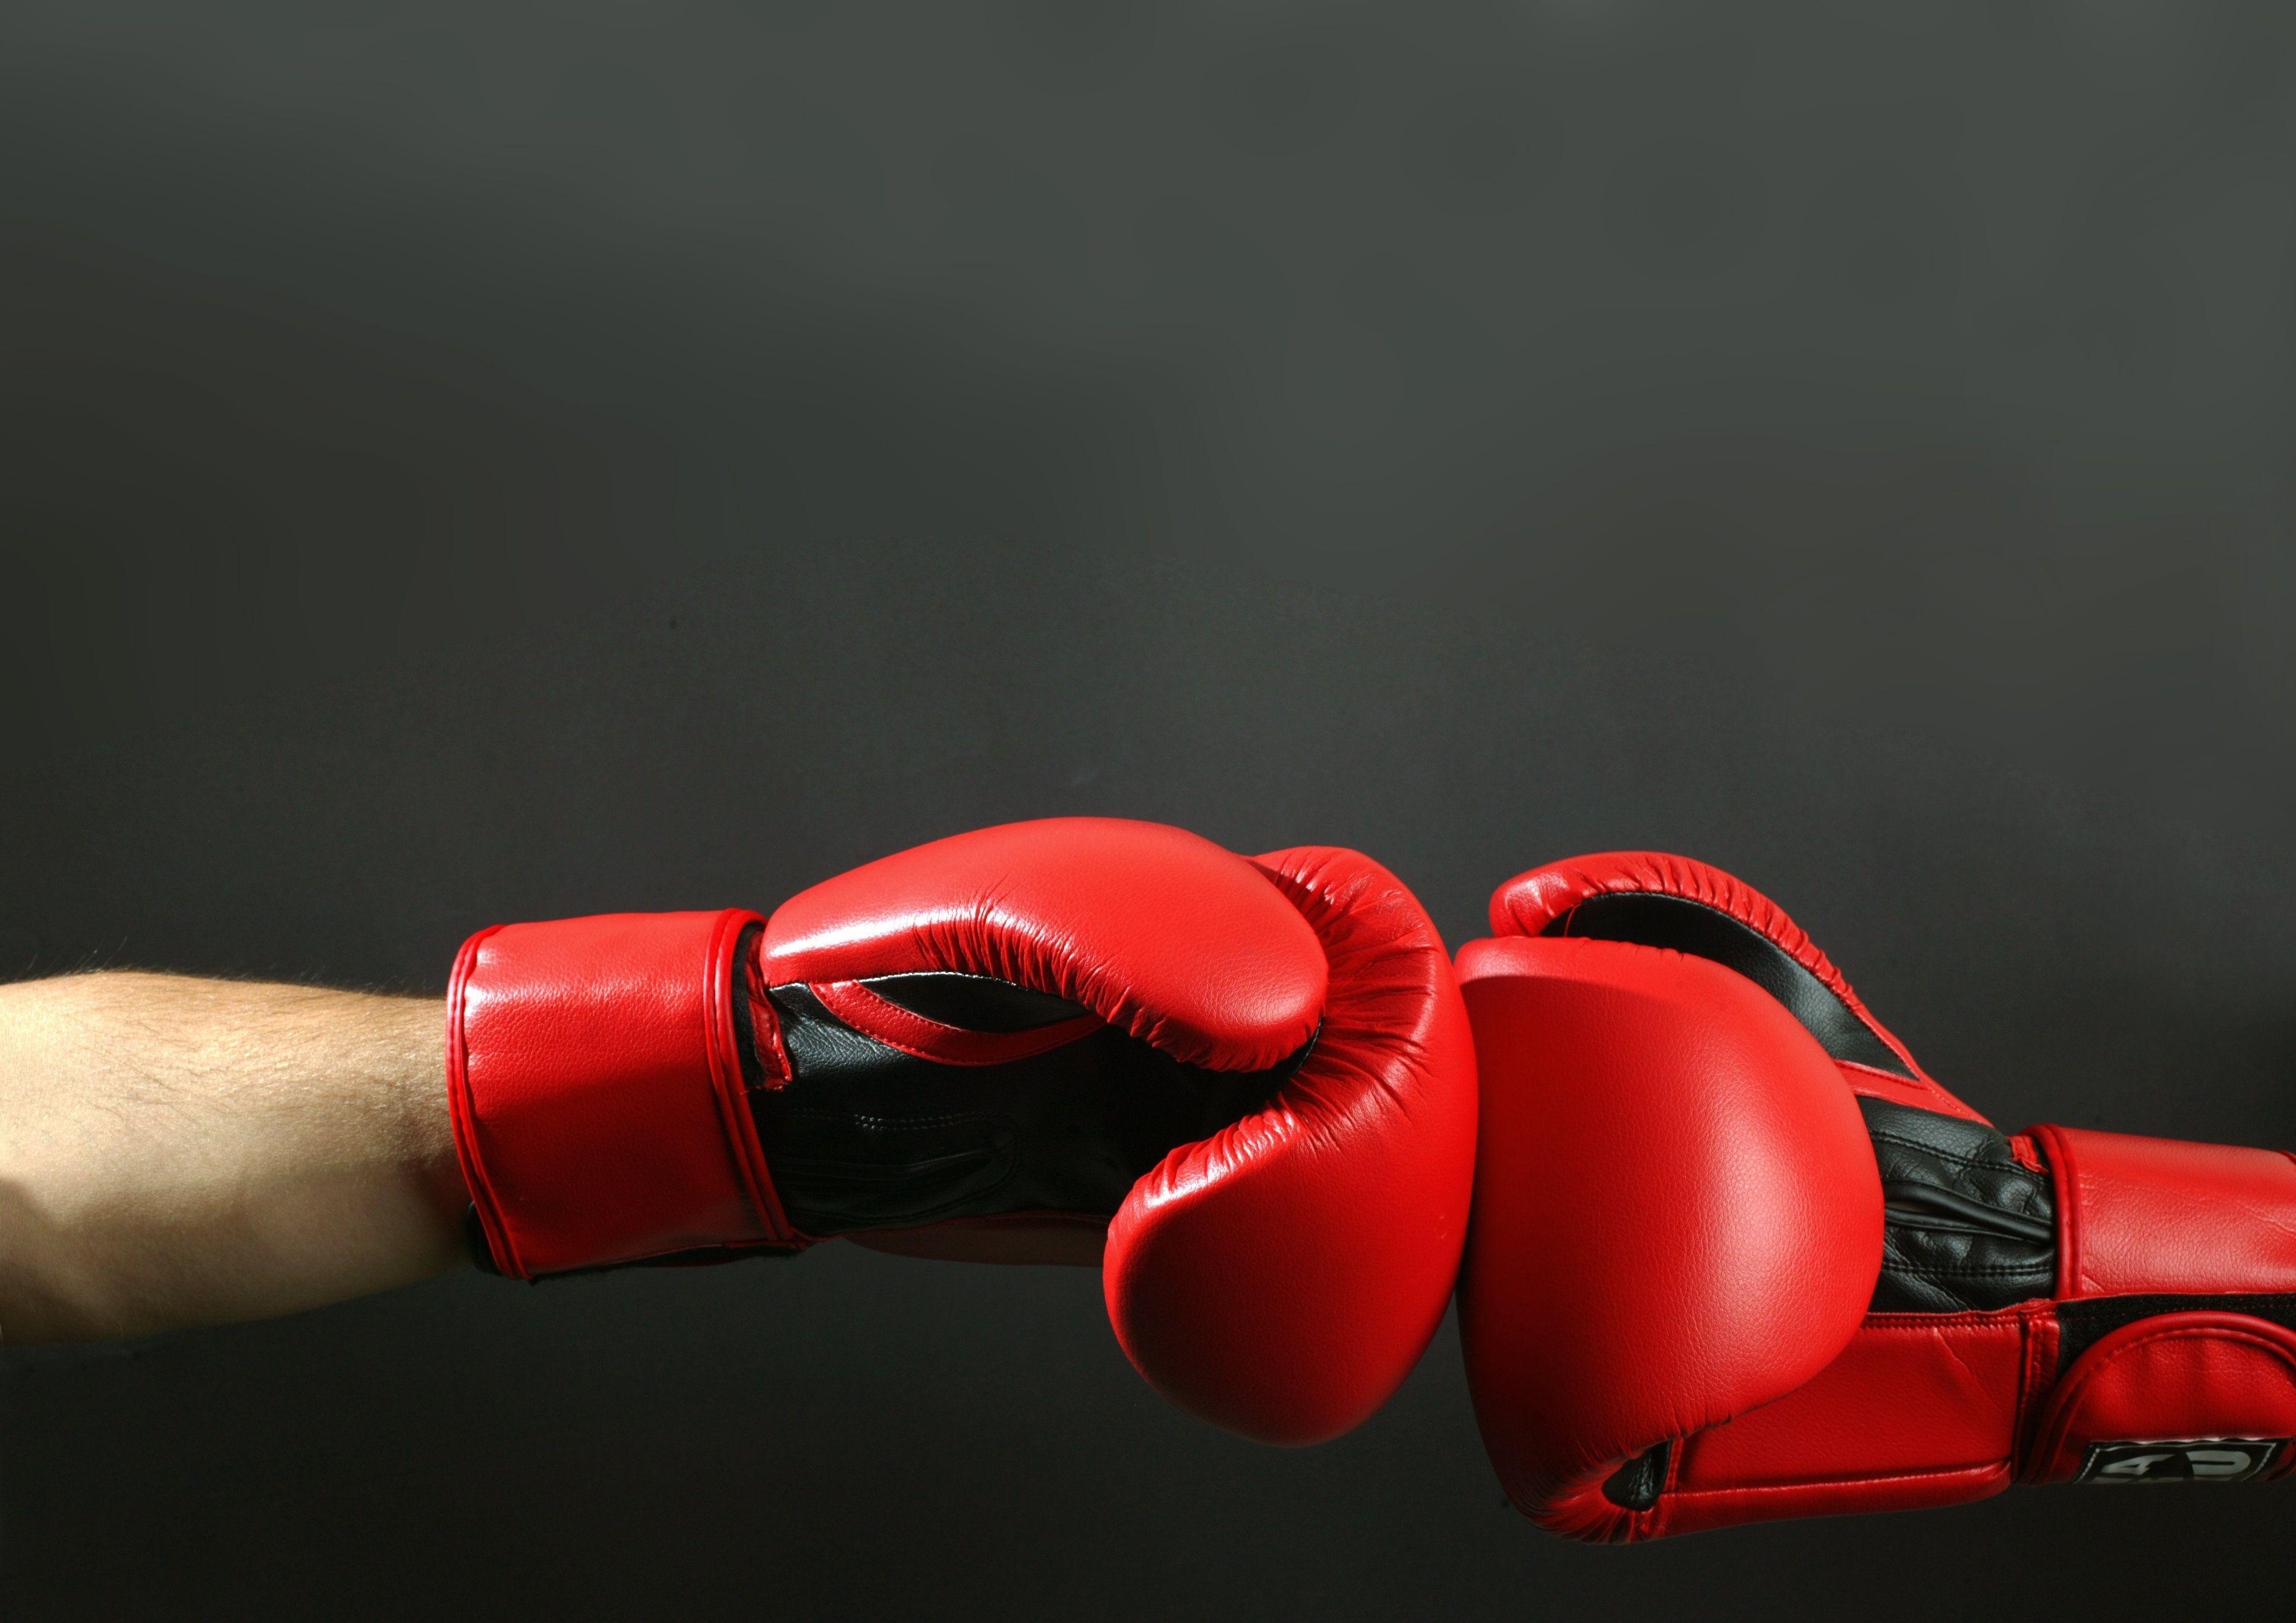 Boxing Gloves Wallpaper Image Photo Picture Background